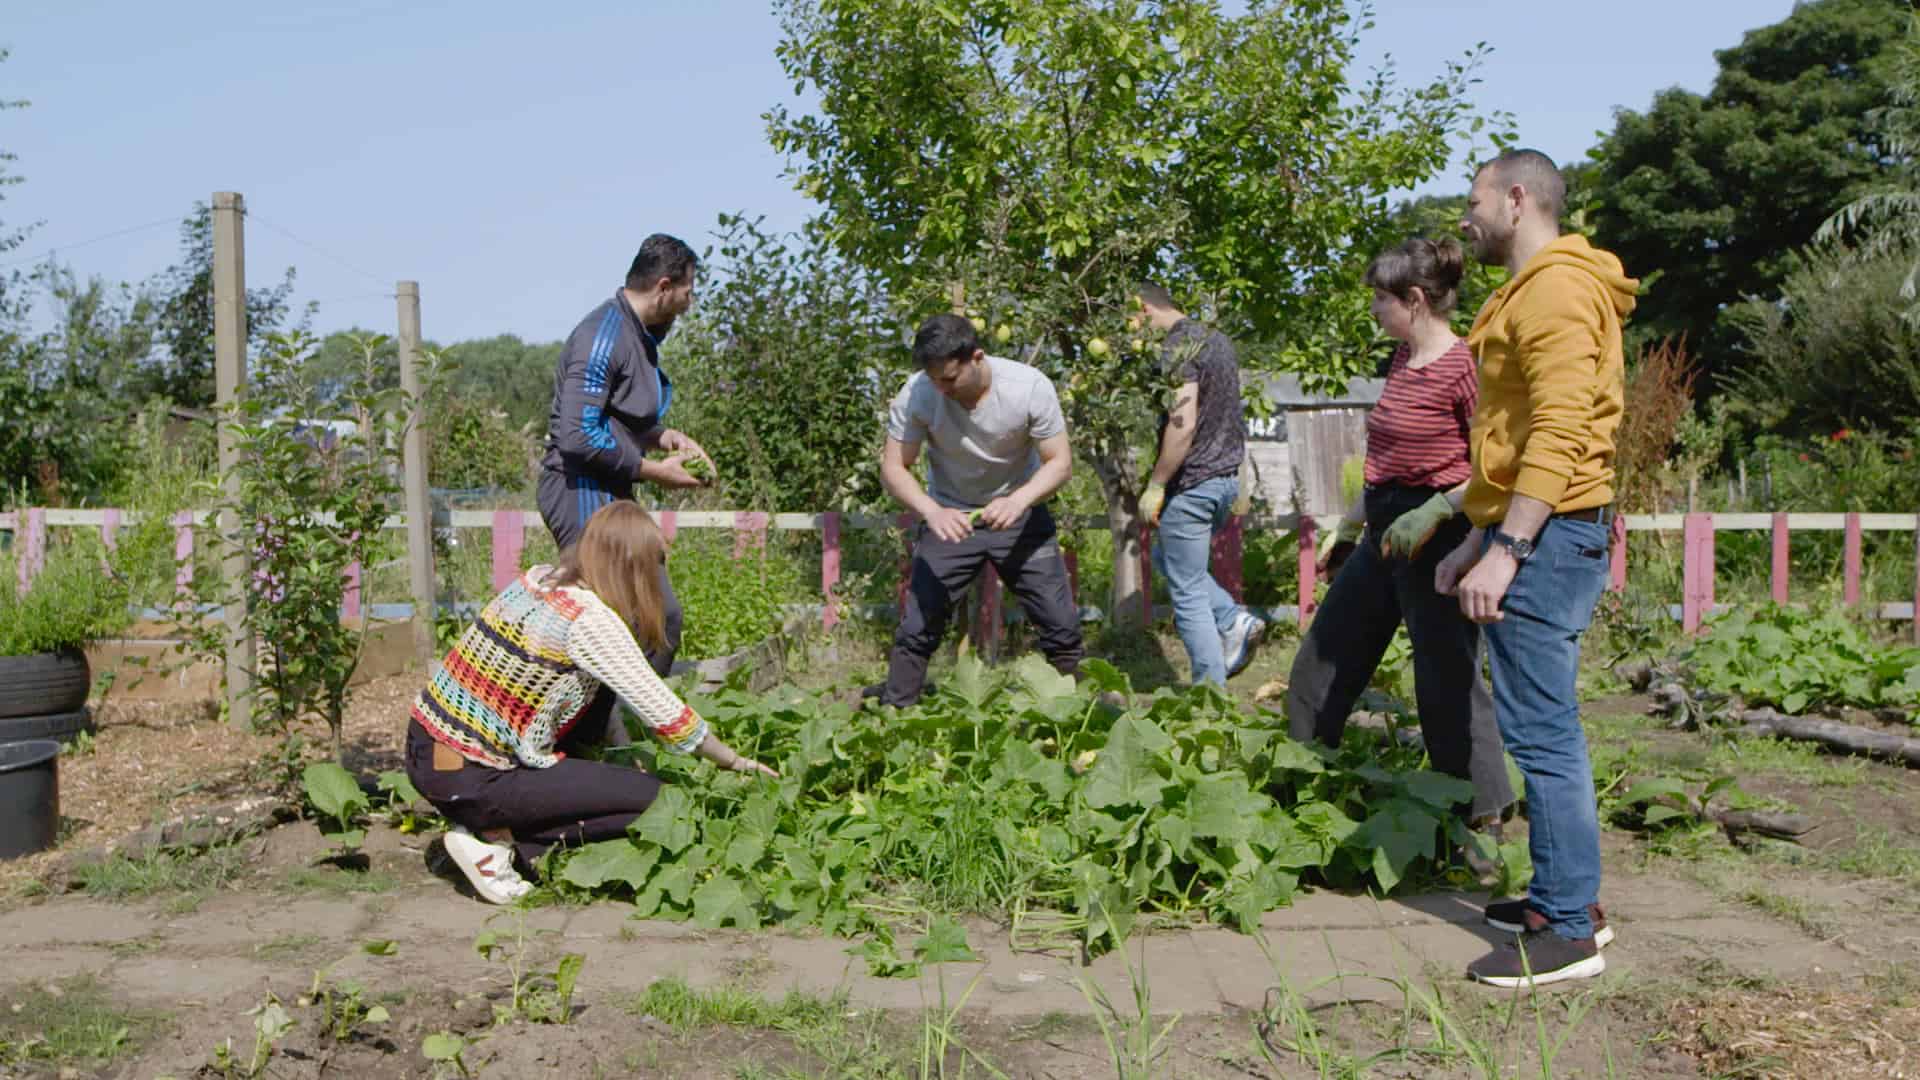 A photo of six people gardening